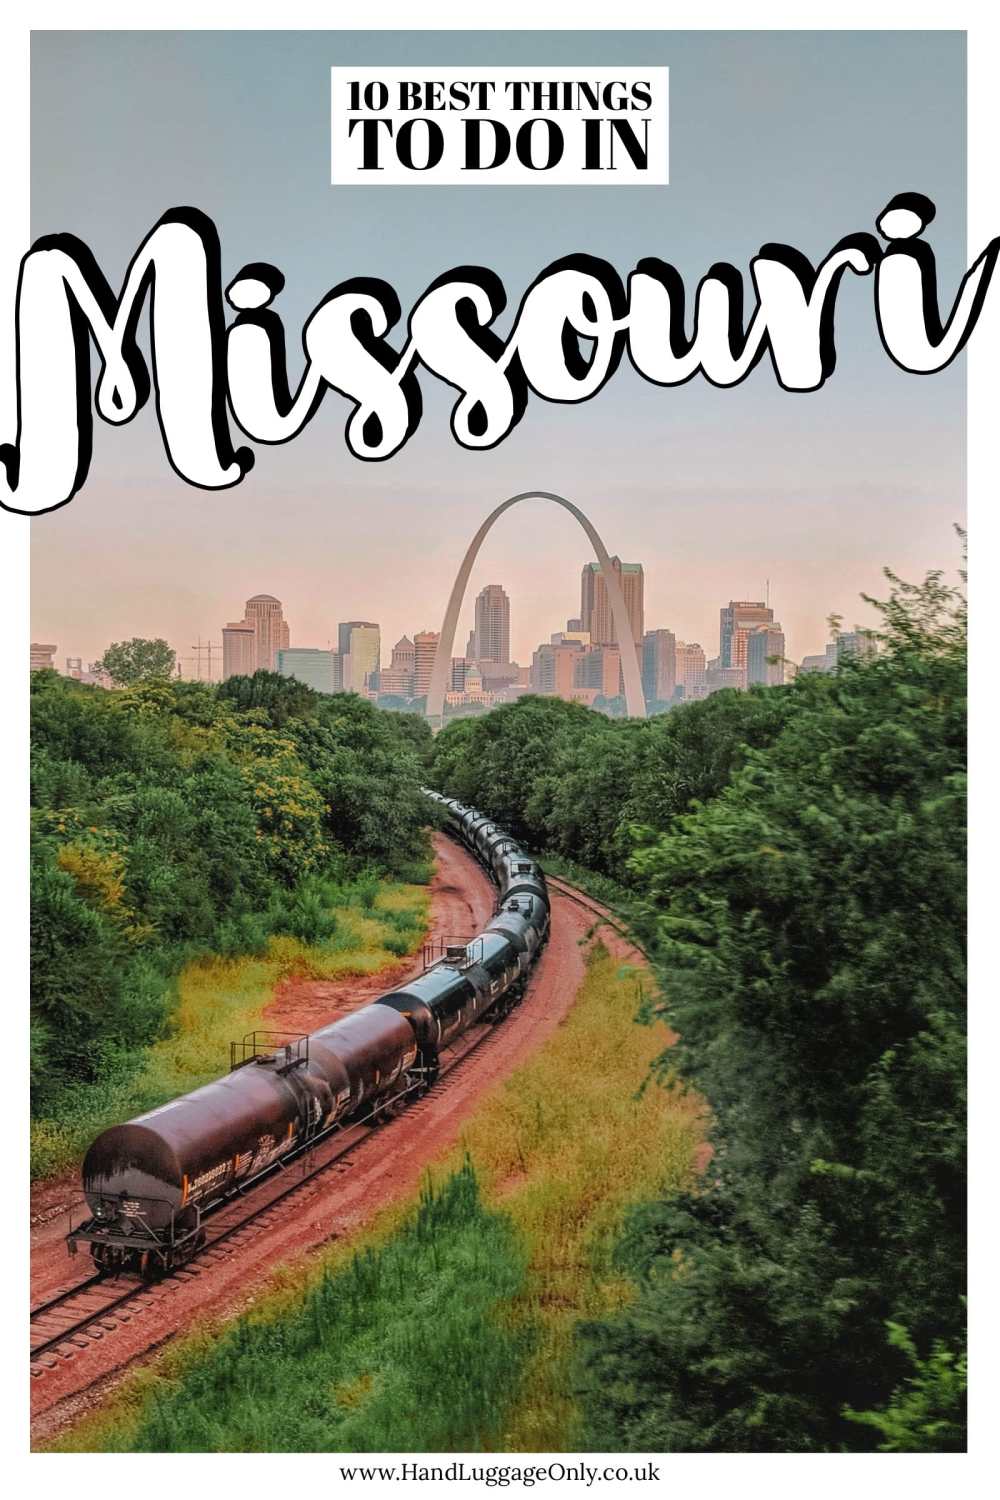 Best Things To Do In Missouri